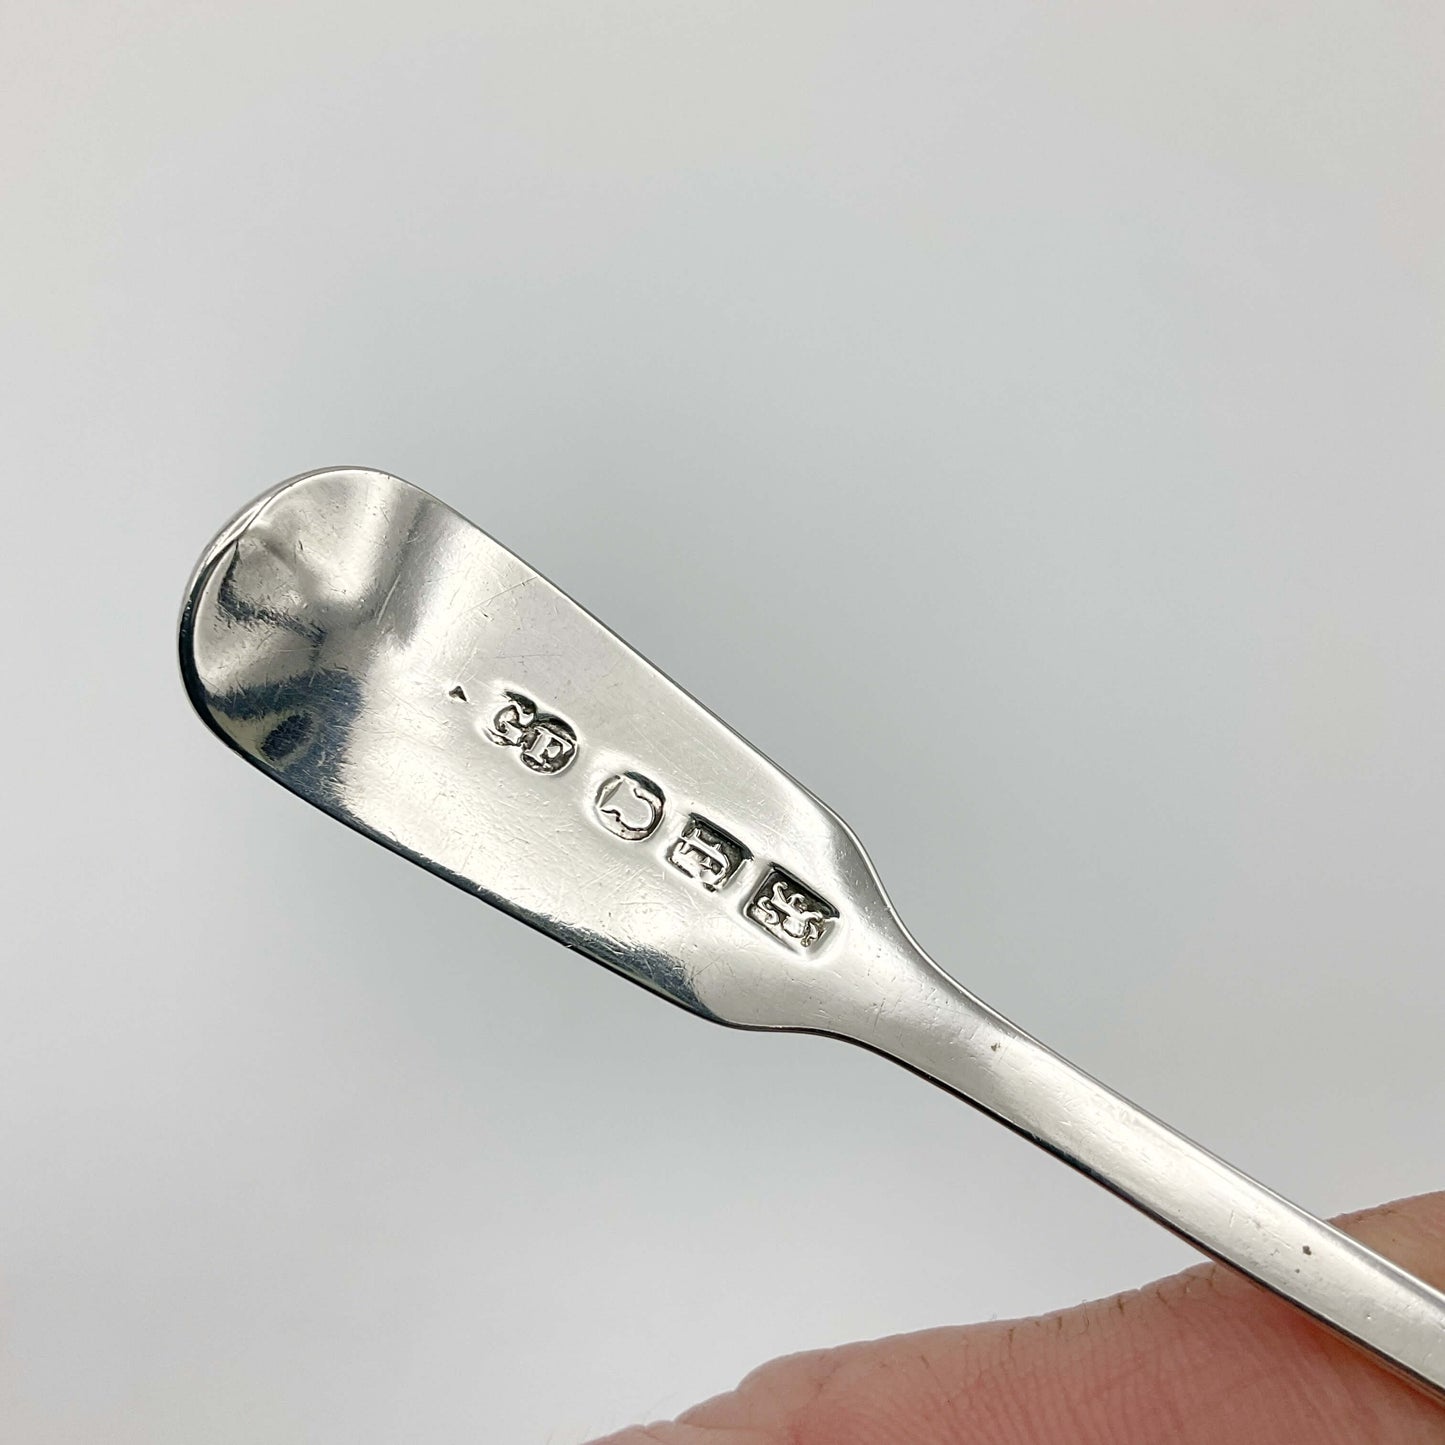 Hallmarks on the back of the antique silver salt spoon handle